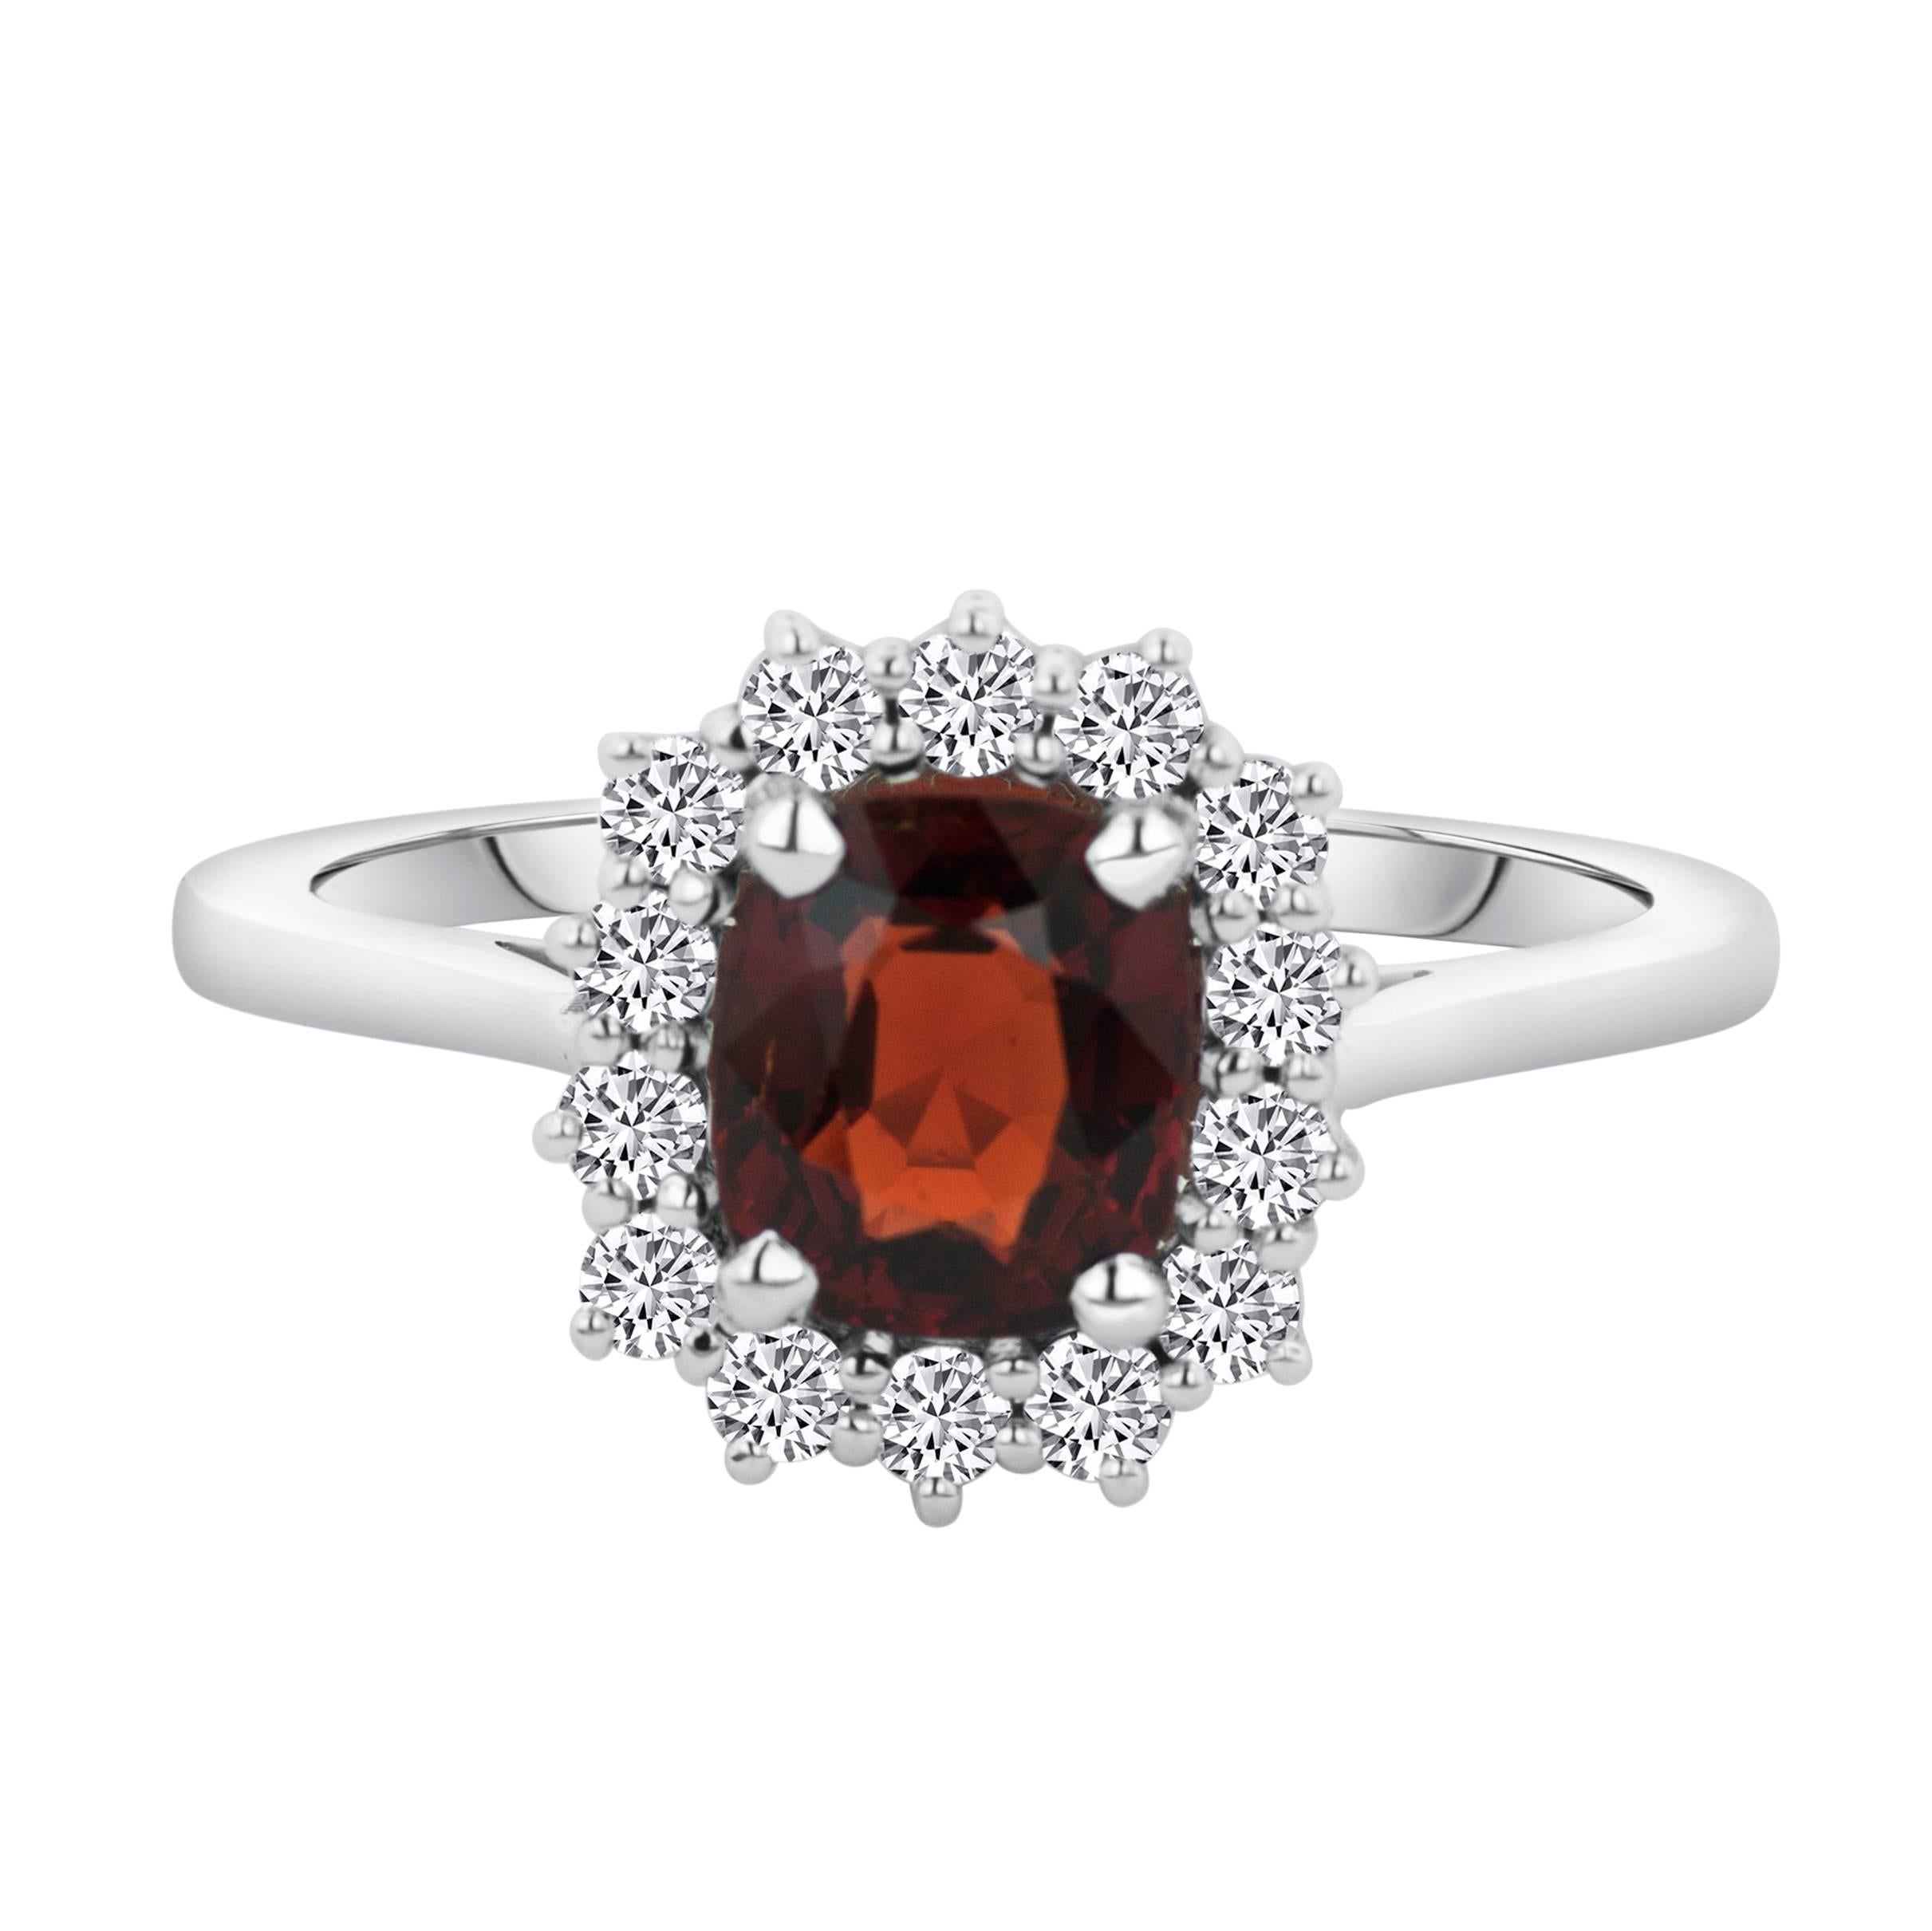 Cushion Cut 1.78 Carat Spinel Diamond Belle Époque Inspired White Gold Engagement Ring For Sale